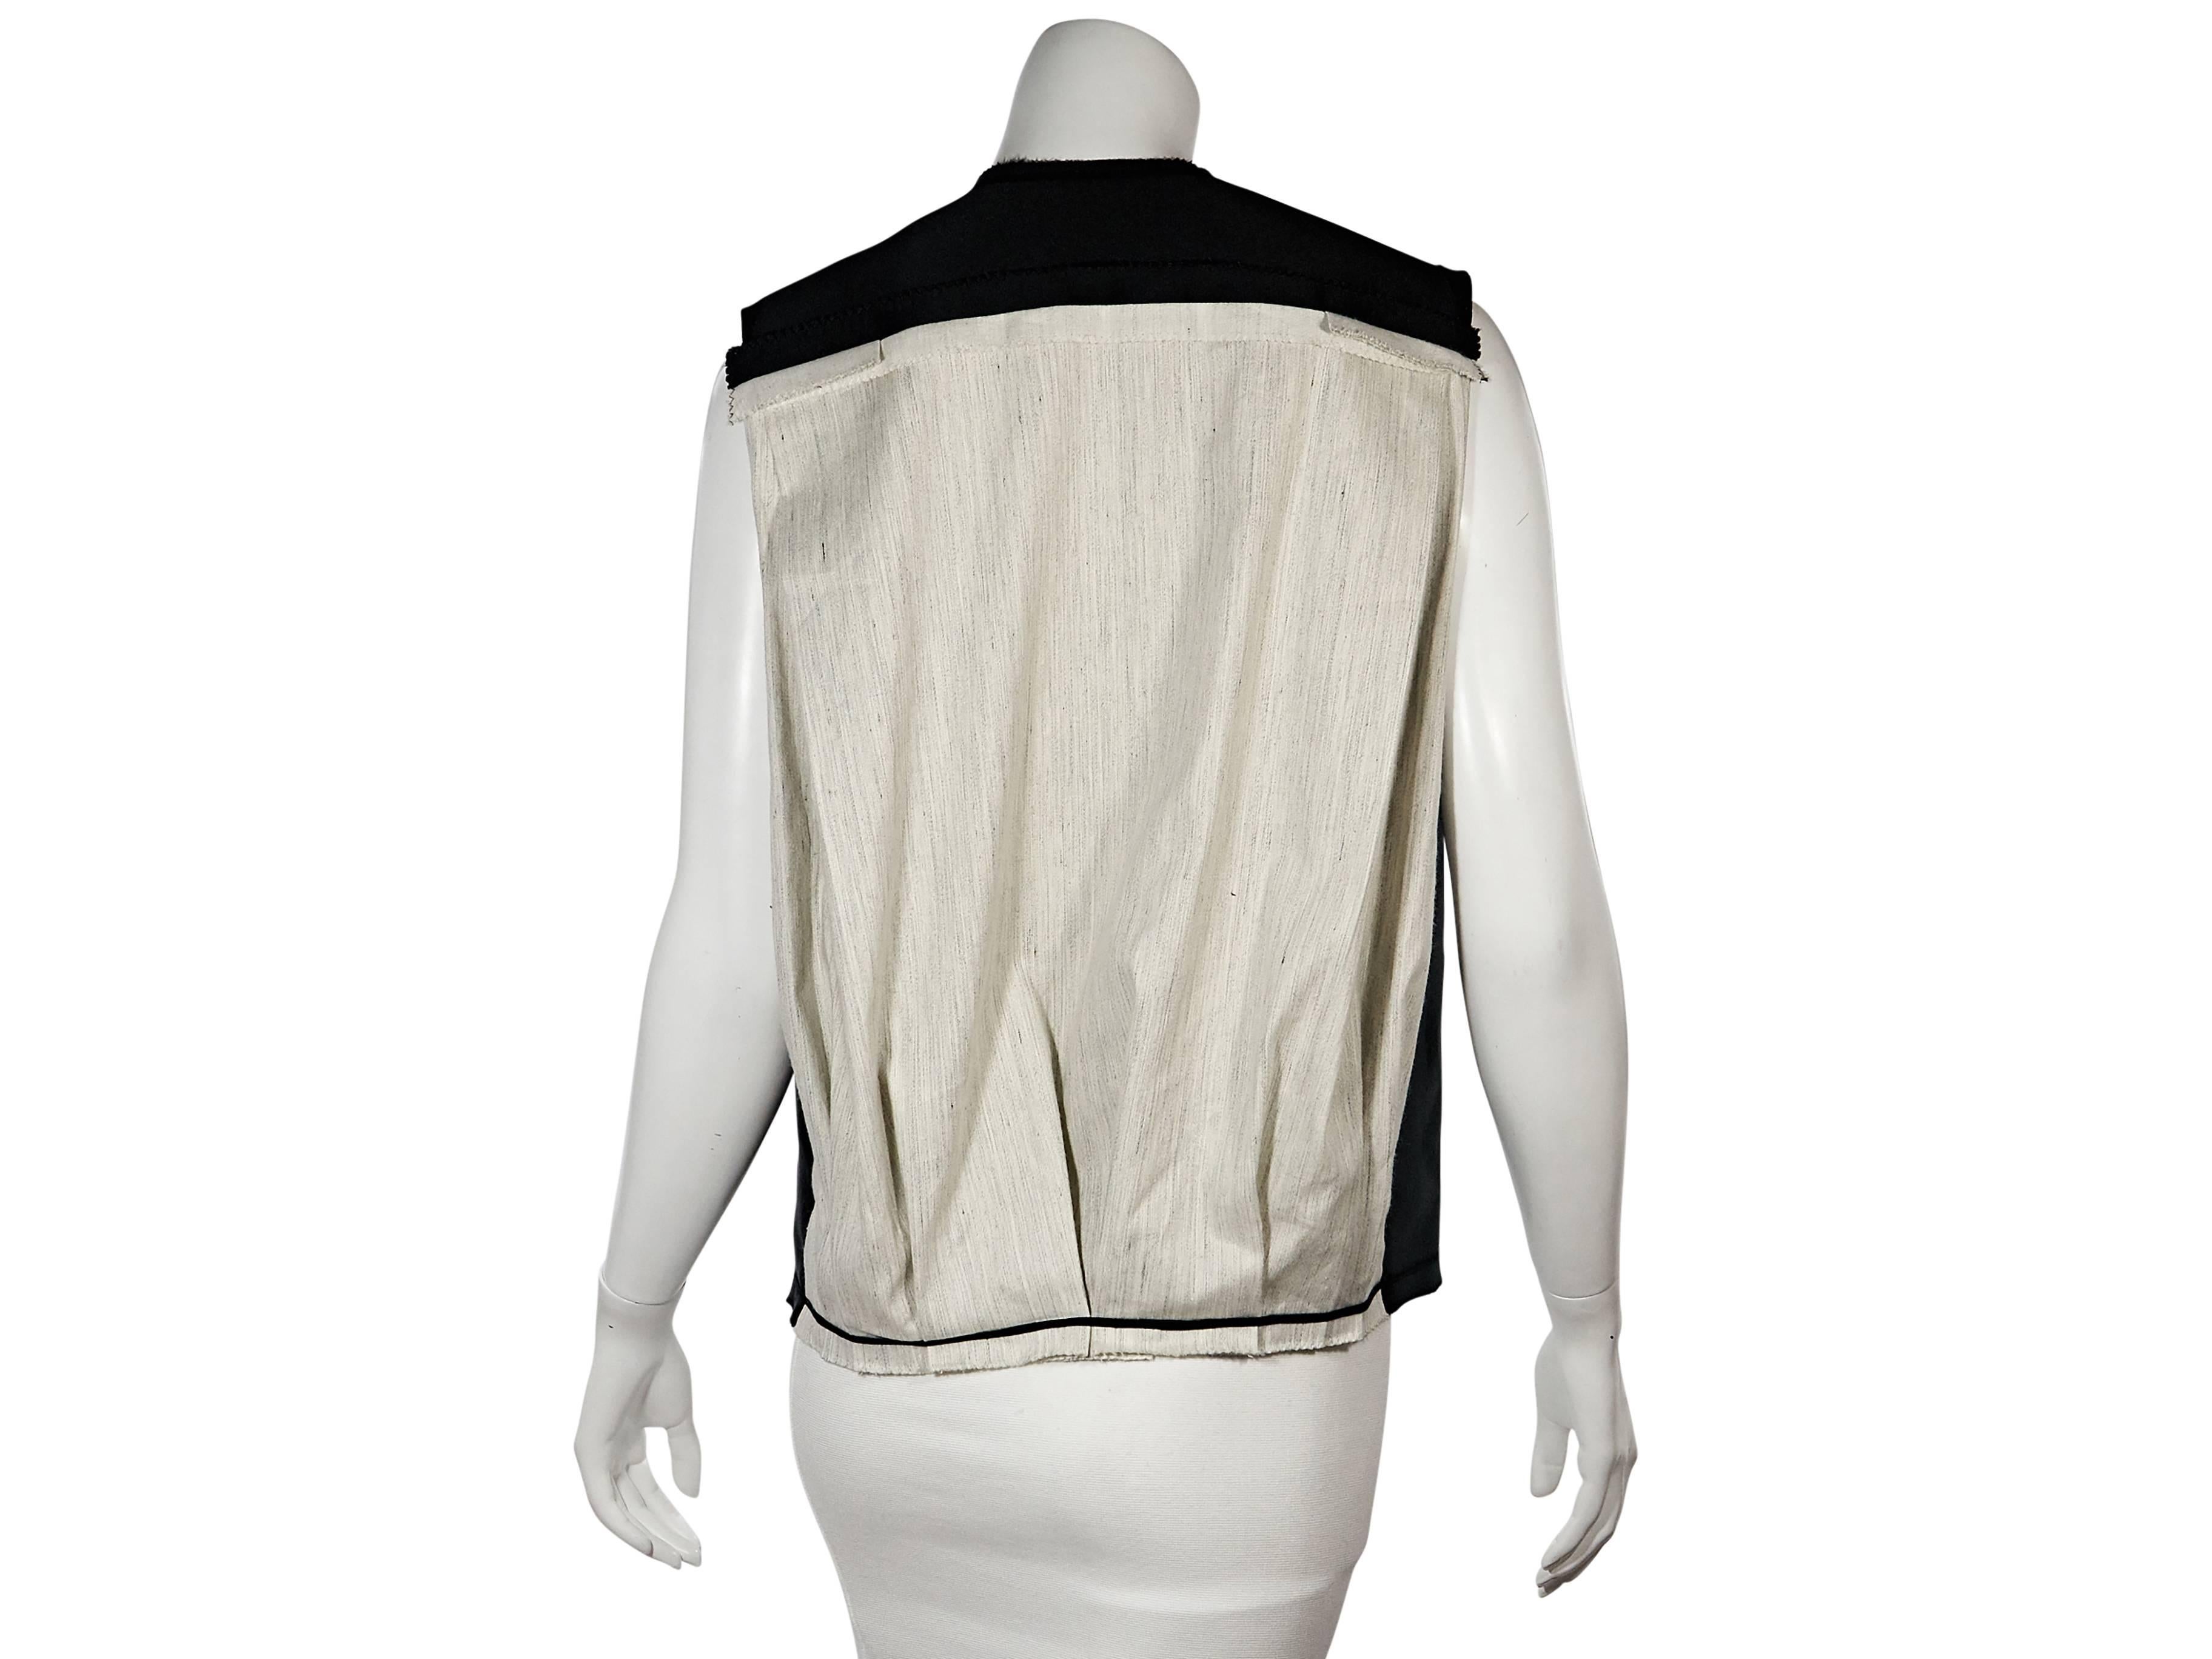 Product details: Black and beige silk-blend vest by Lanvin. Accented with bows. Sleeveless. Concealed front closure. 
Condition: Very good. 
Est. Retail $ 1,028.00